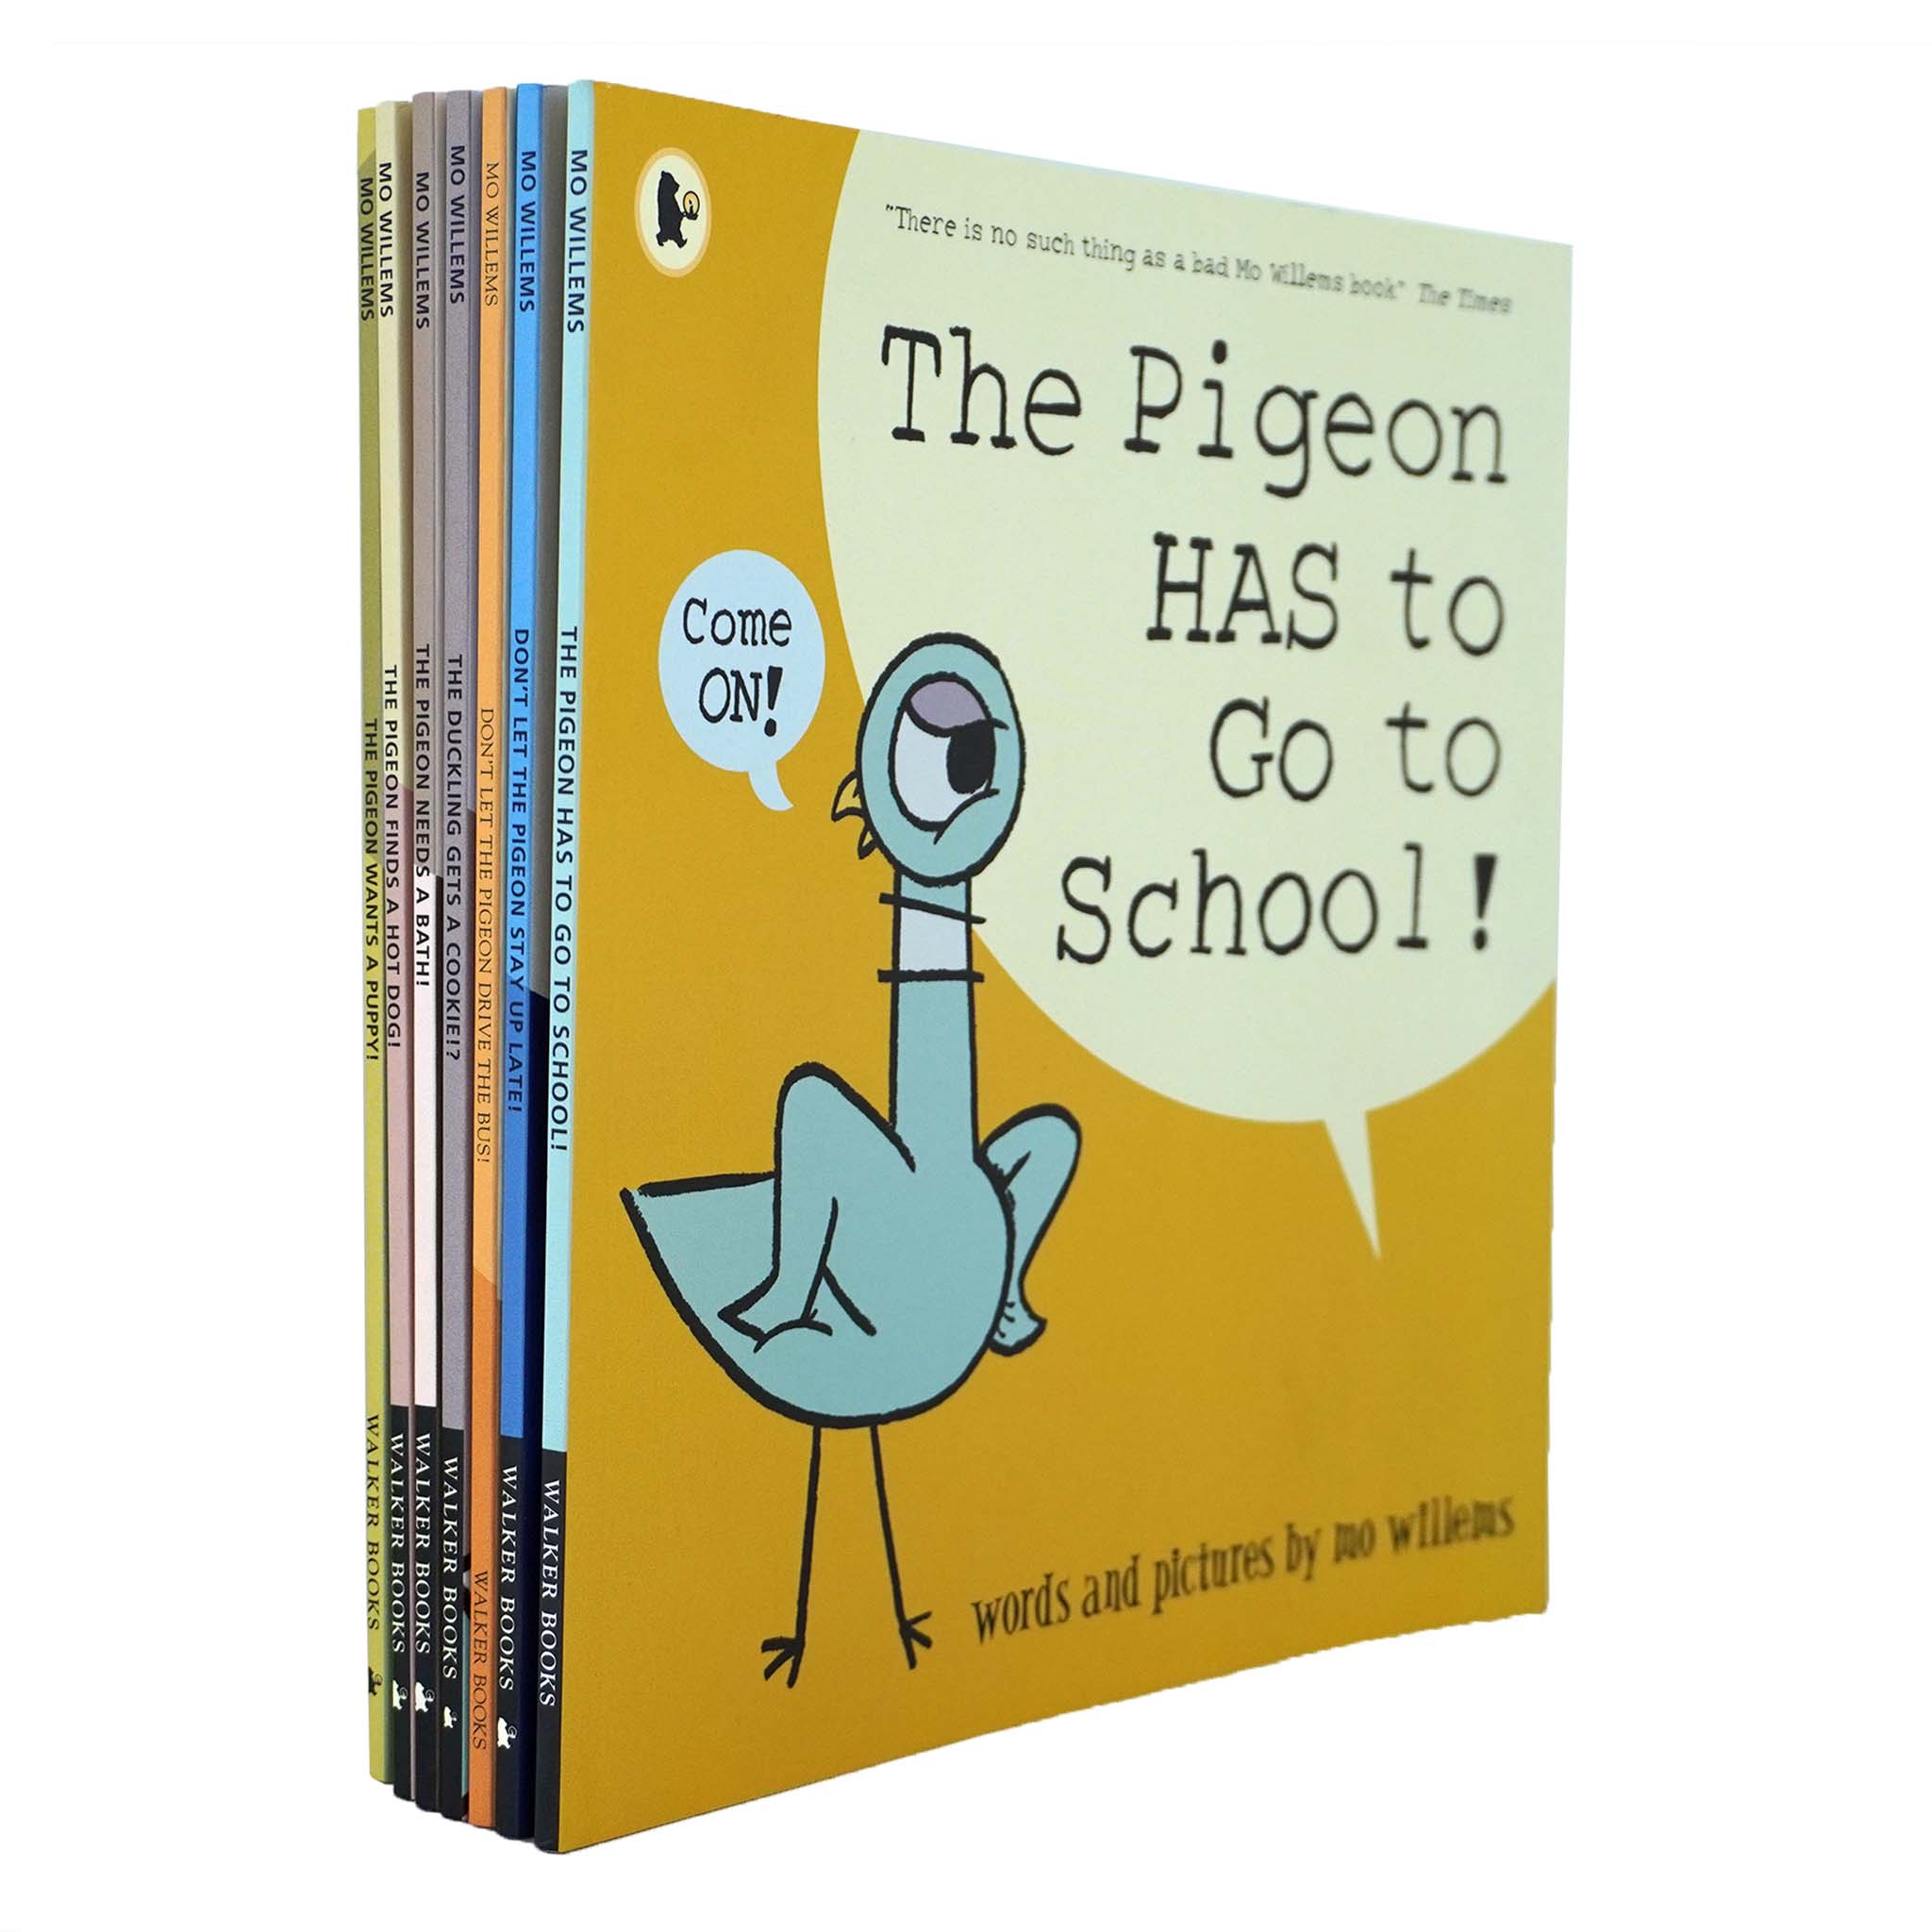 Don't Let the Pigeon Series 7 Books Collection Set By Mo Willems - Age 3-7 - Paperback